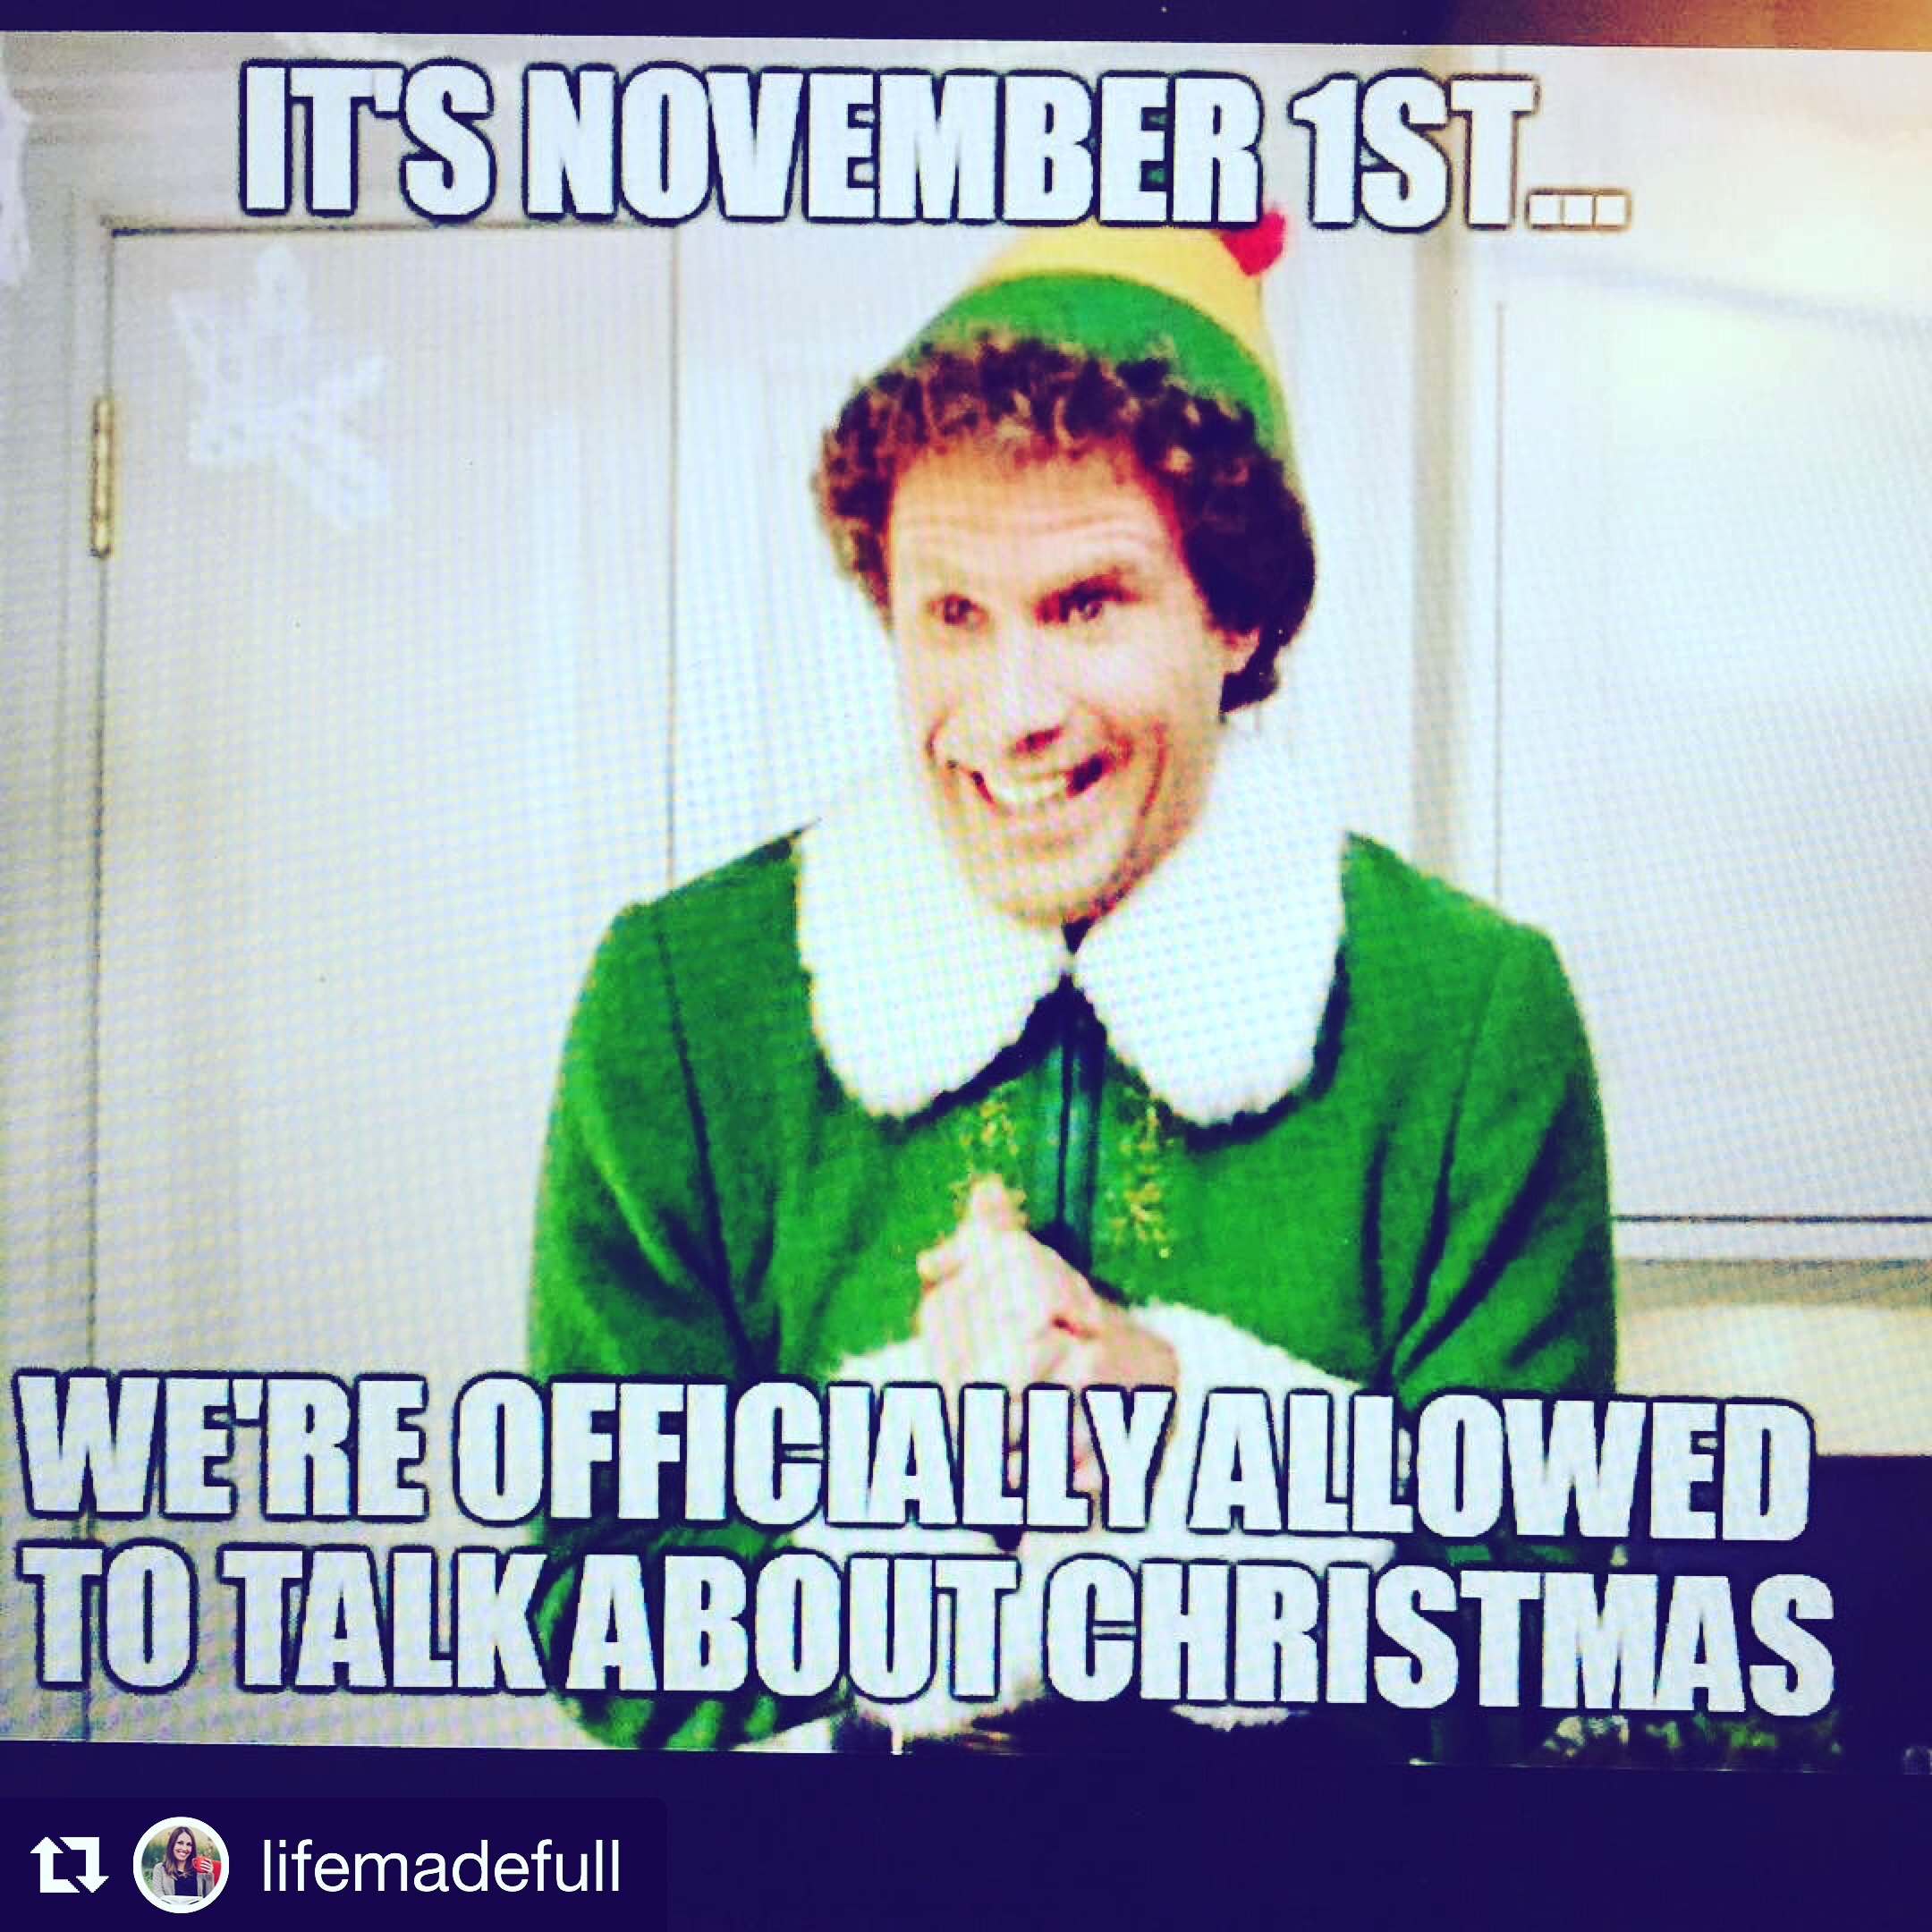 Funny Christmas meme featuring Will Ferrel's Elf character